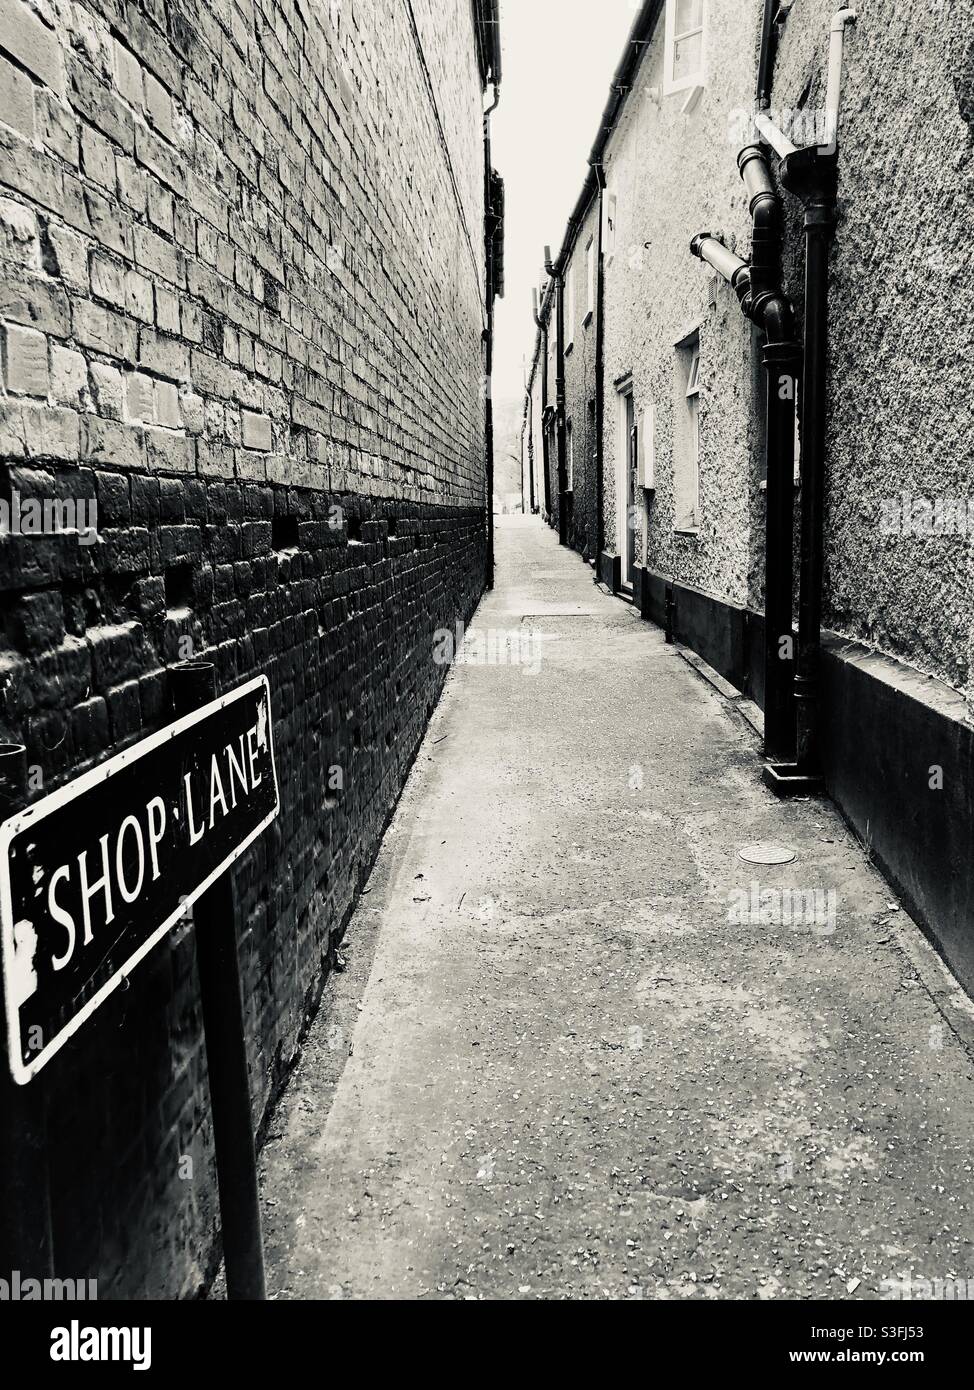 Shop Lane - a narrow alley in Wells-next-the-sea shown here in black and white Stock Photo